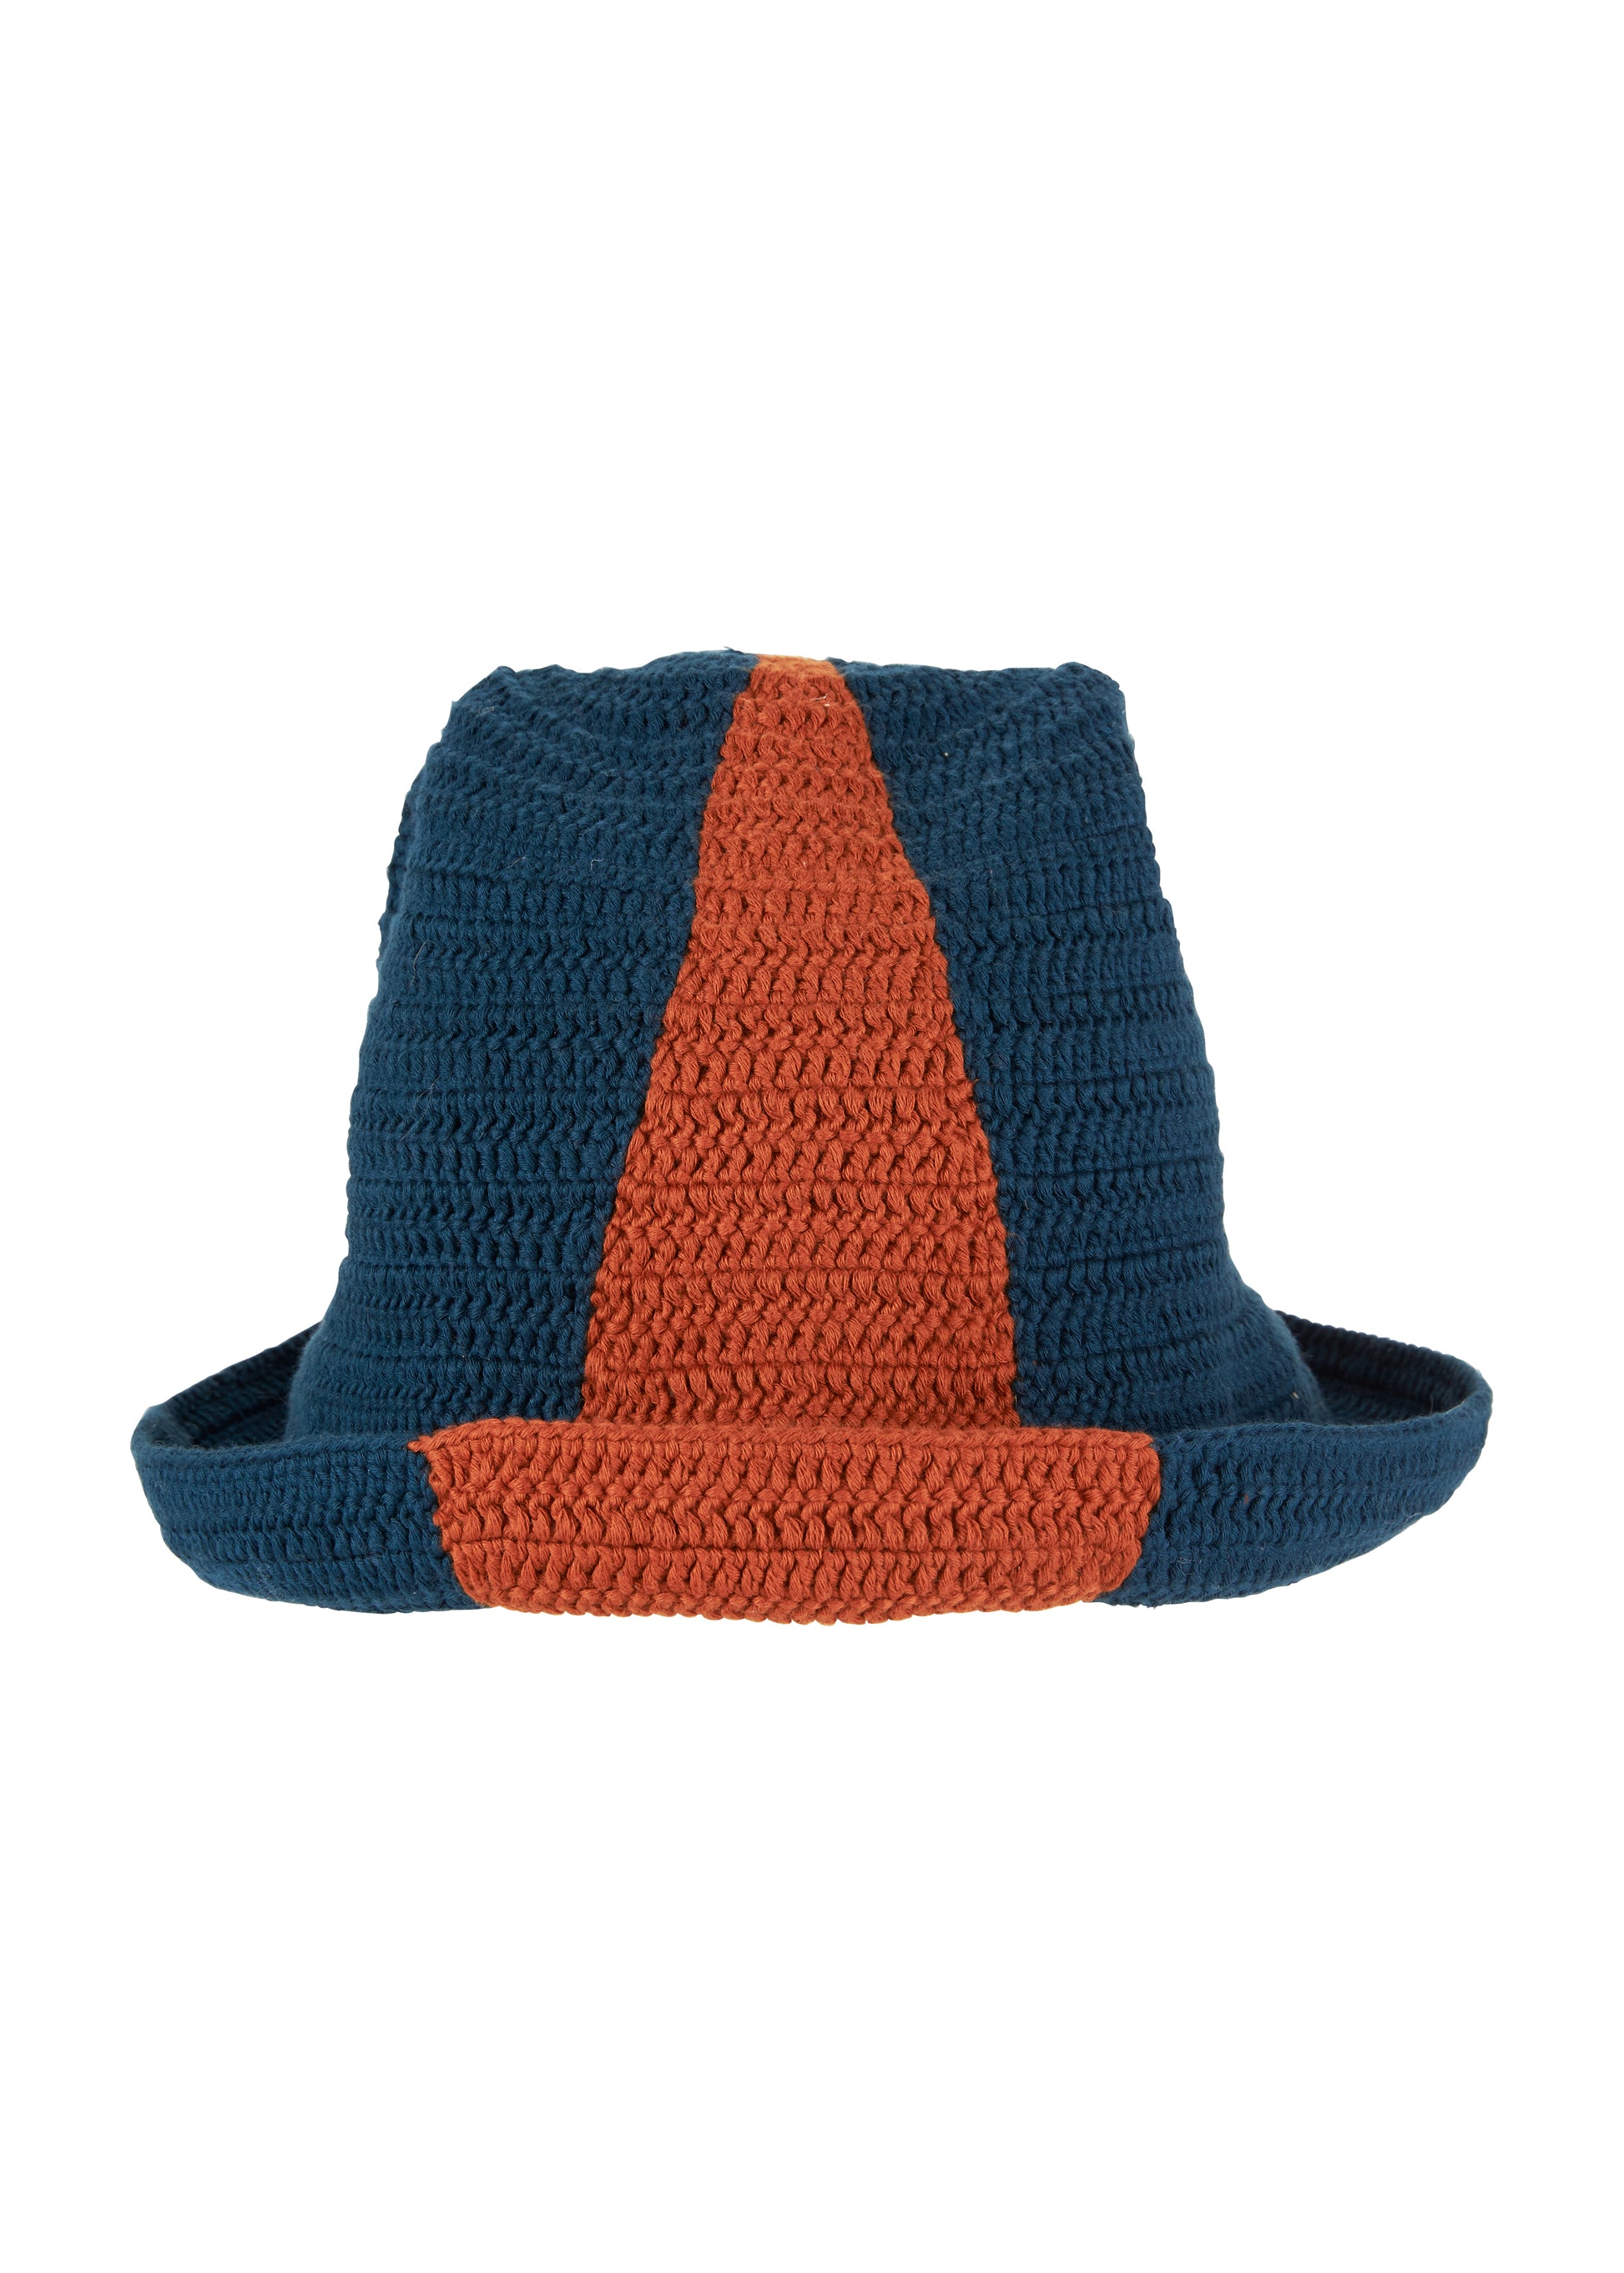 Cotton crochet bucket hat with dual stripe in Navy and Brown. Handmade sustainably from landfill diverted fibre. Soft hand feel. One size fits all.